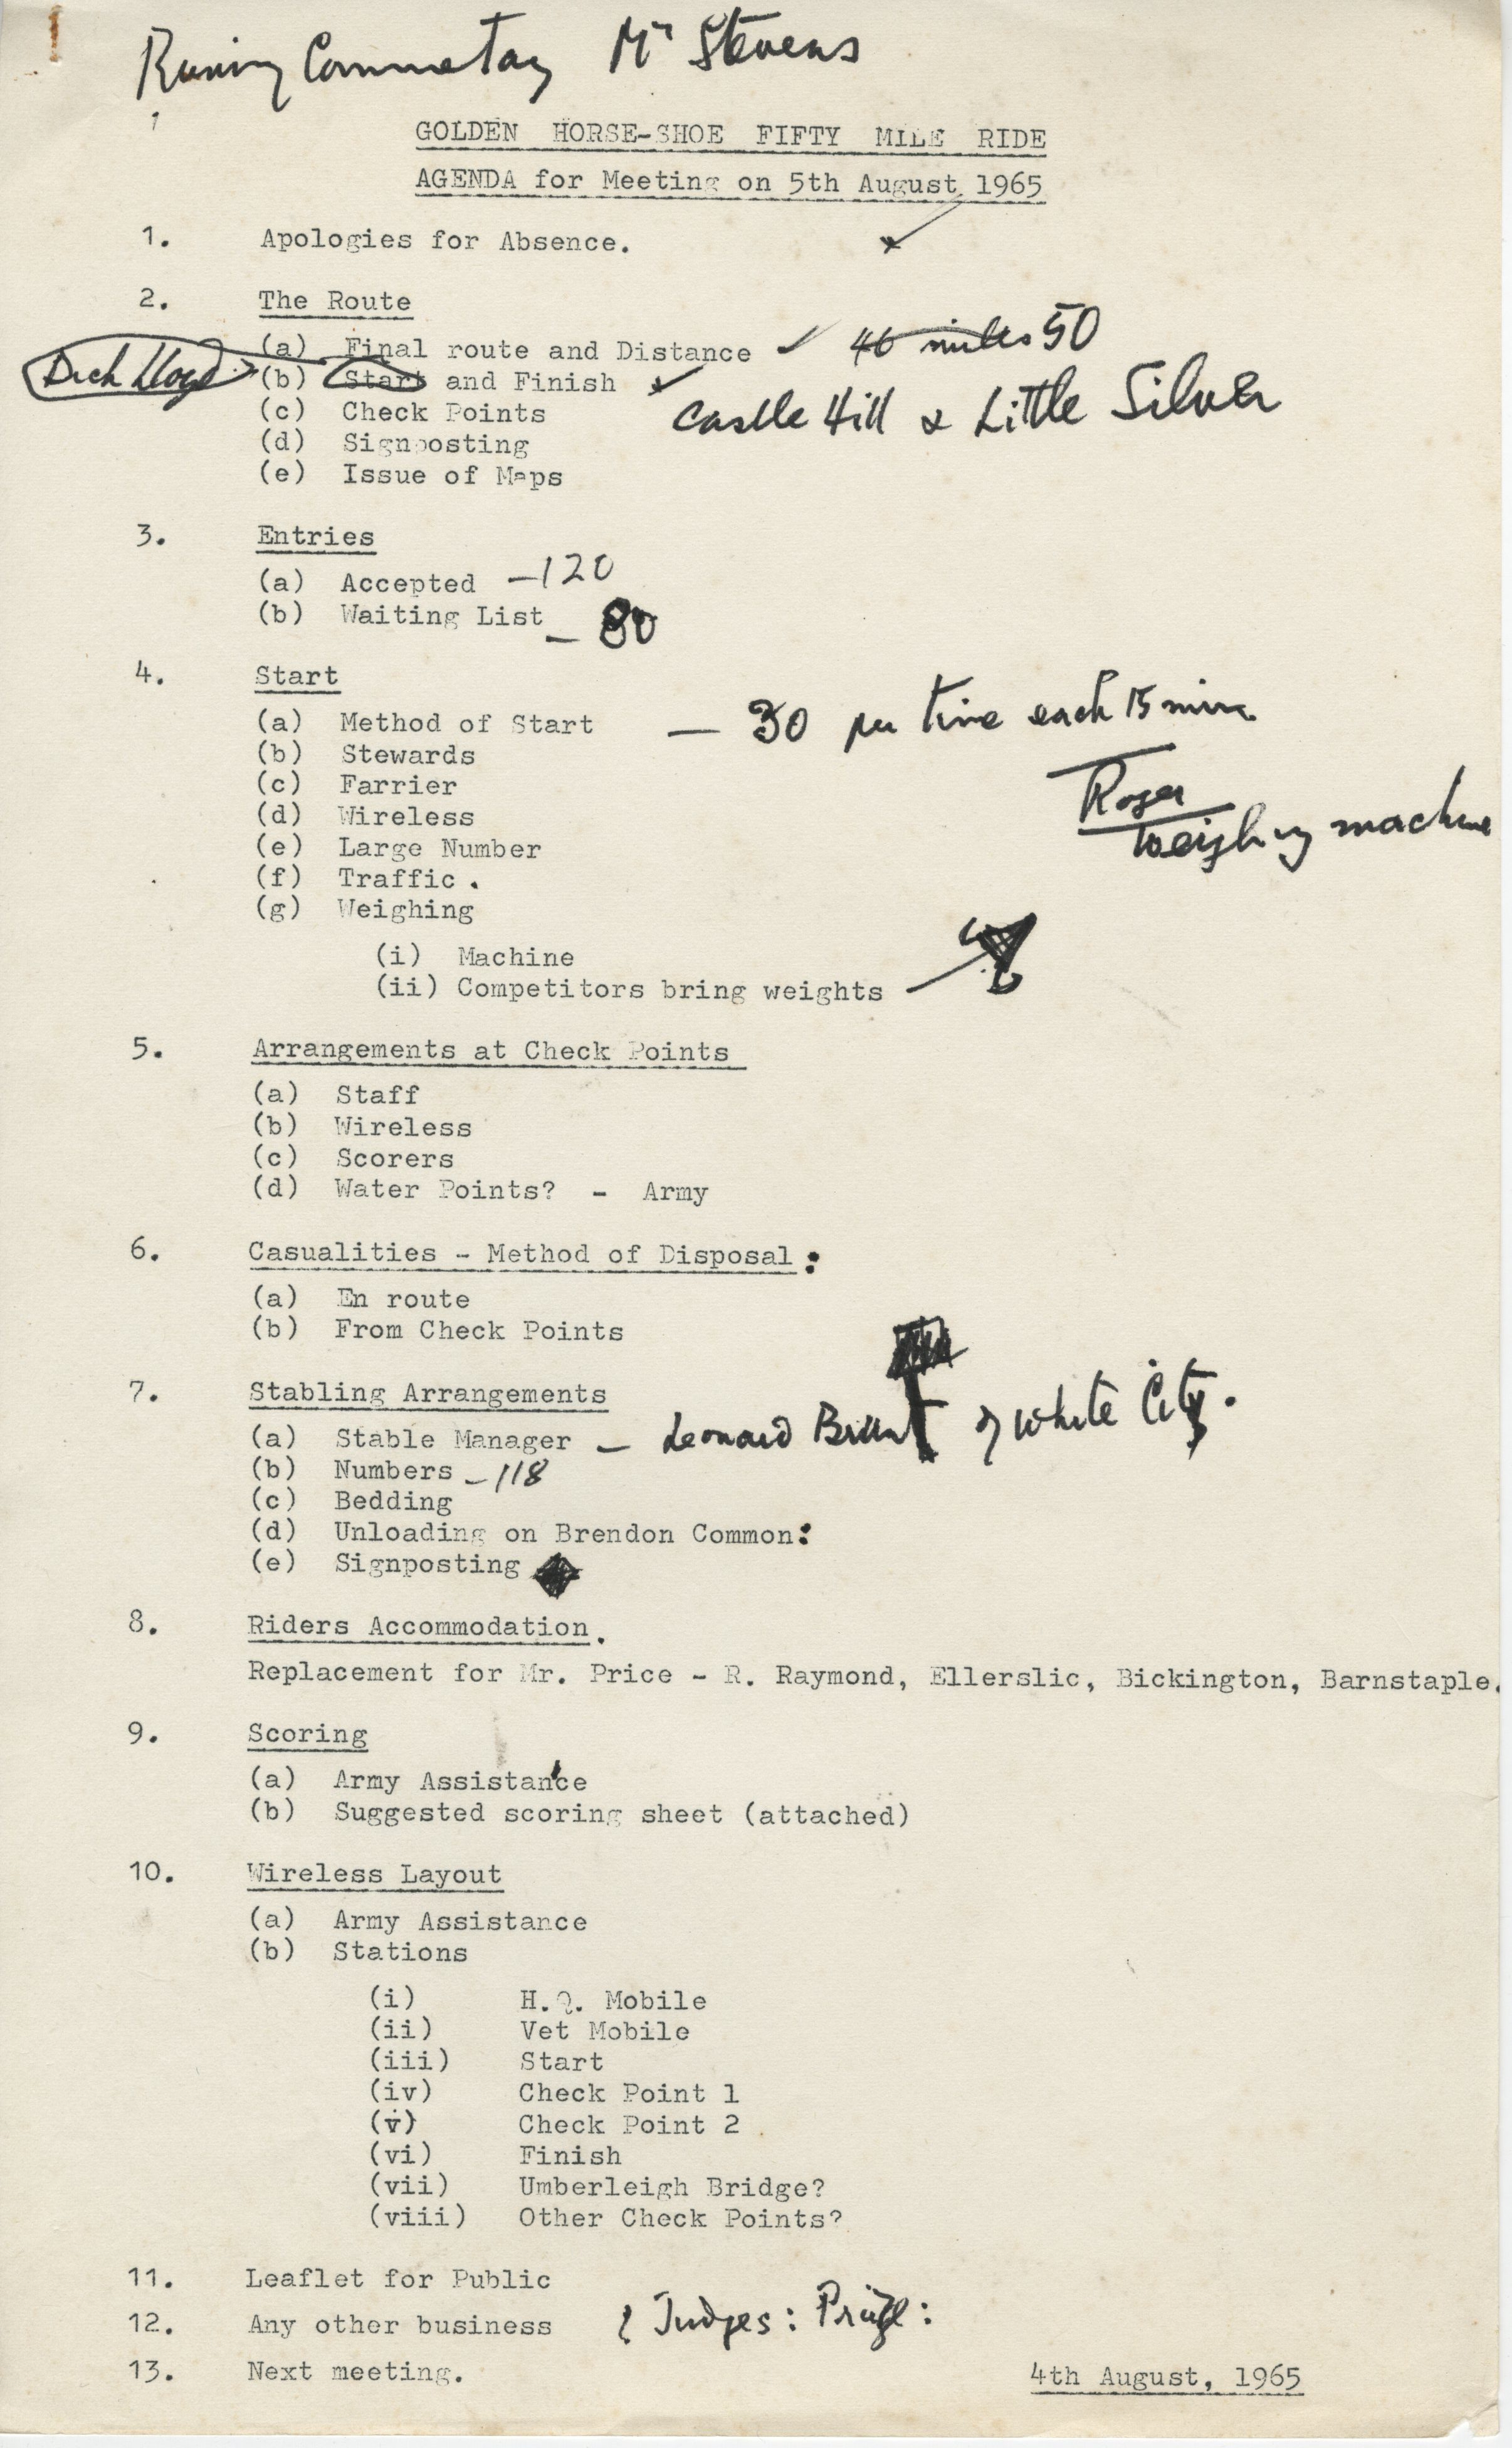 EUL MS 397_1041 Annotated agenda for a meeting of the Golden Horseshoe Fifty Mile Ride committee (4 August 1965)